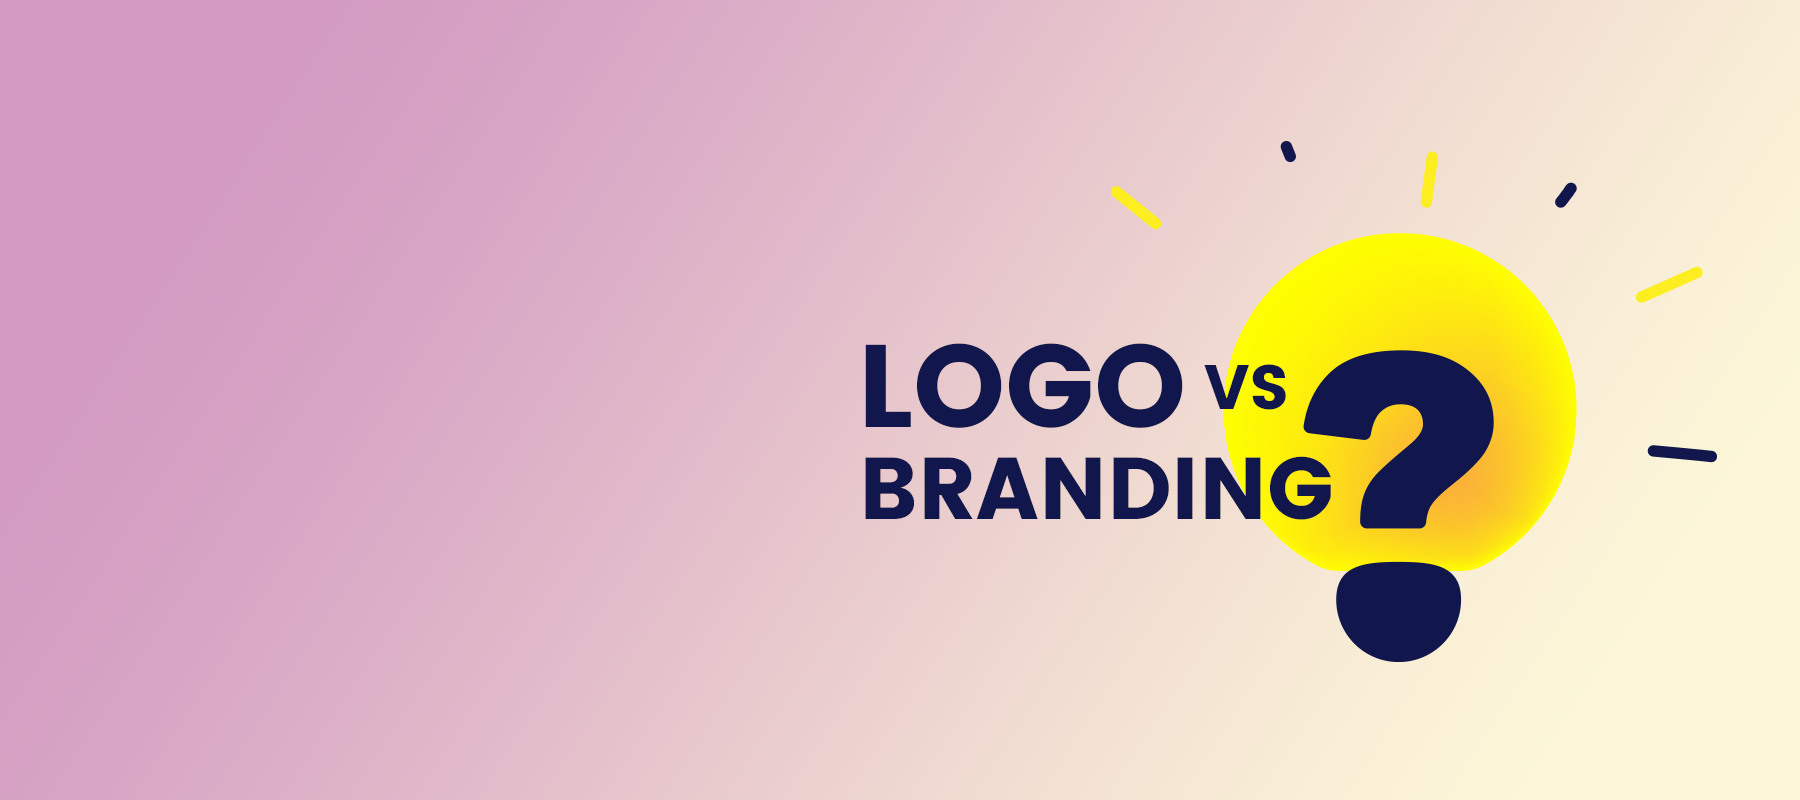 What’s the difference between A logo and branding